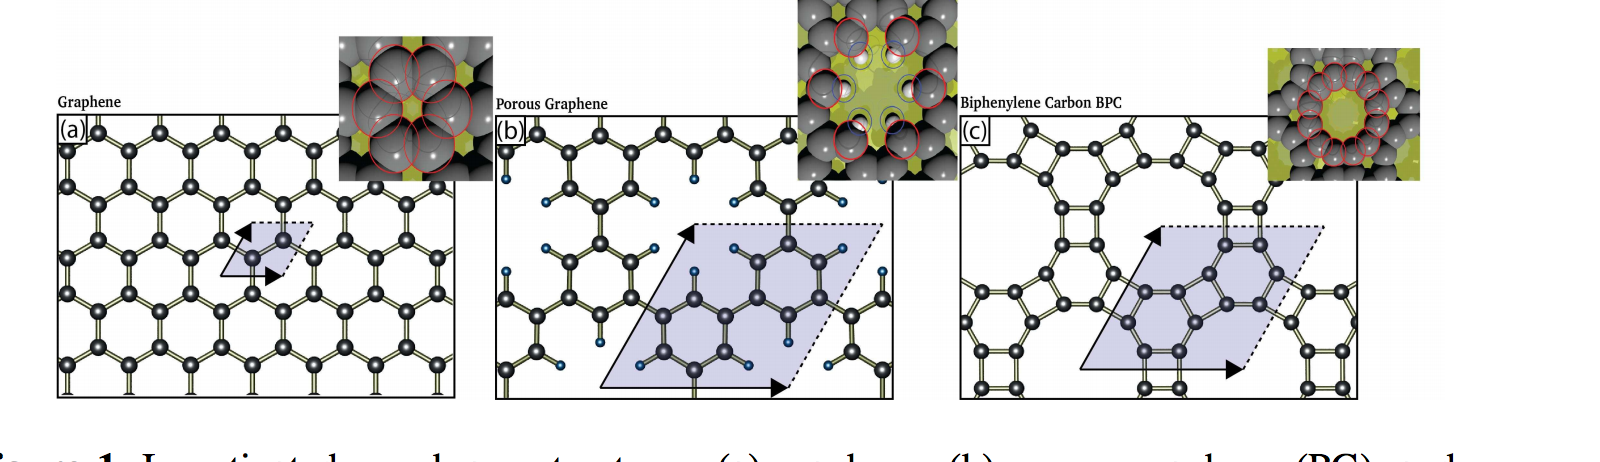 Graphene-like Membranes: From Impermeable to Selective Sieves